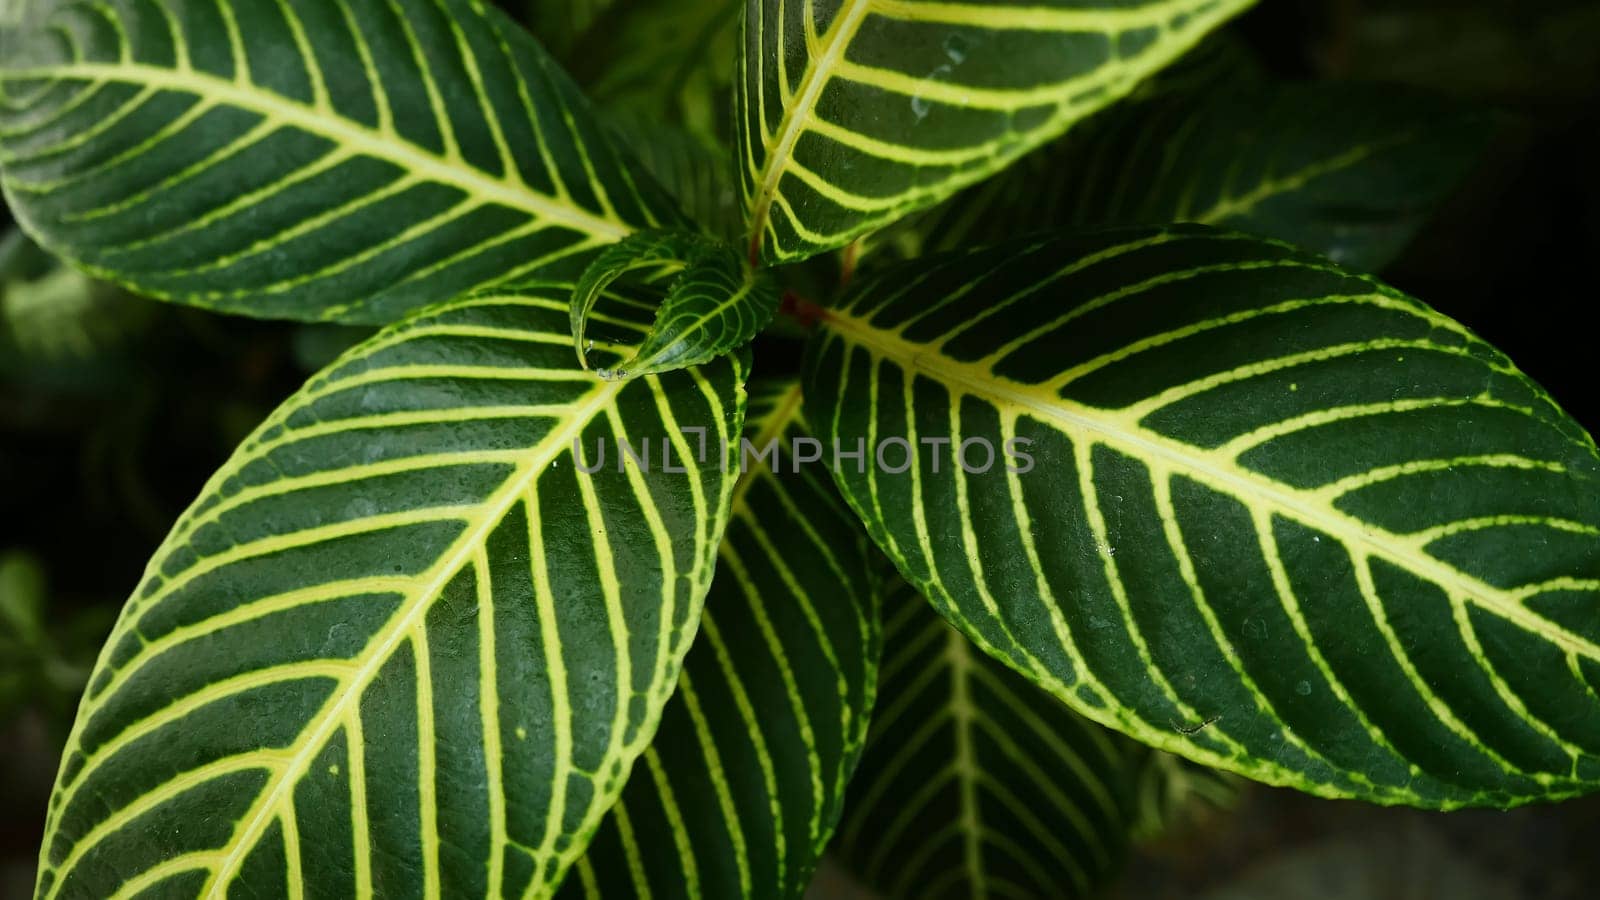 picture of leaves from a plant called Aphelandra squarrosa Nees, from the genus of Acanthaceae, or also known as Zebra Plant by antoksena